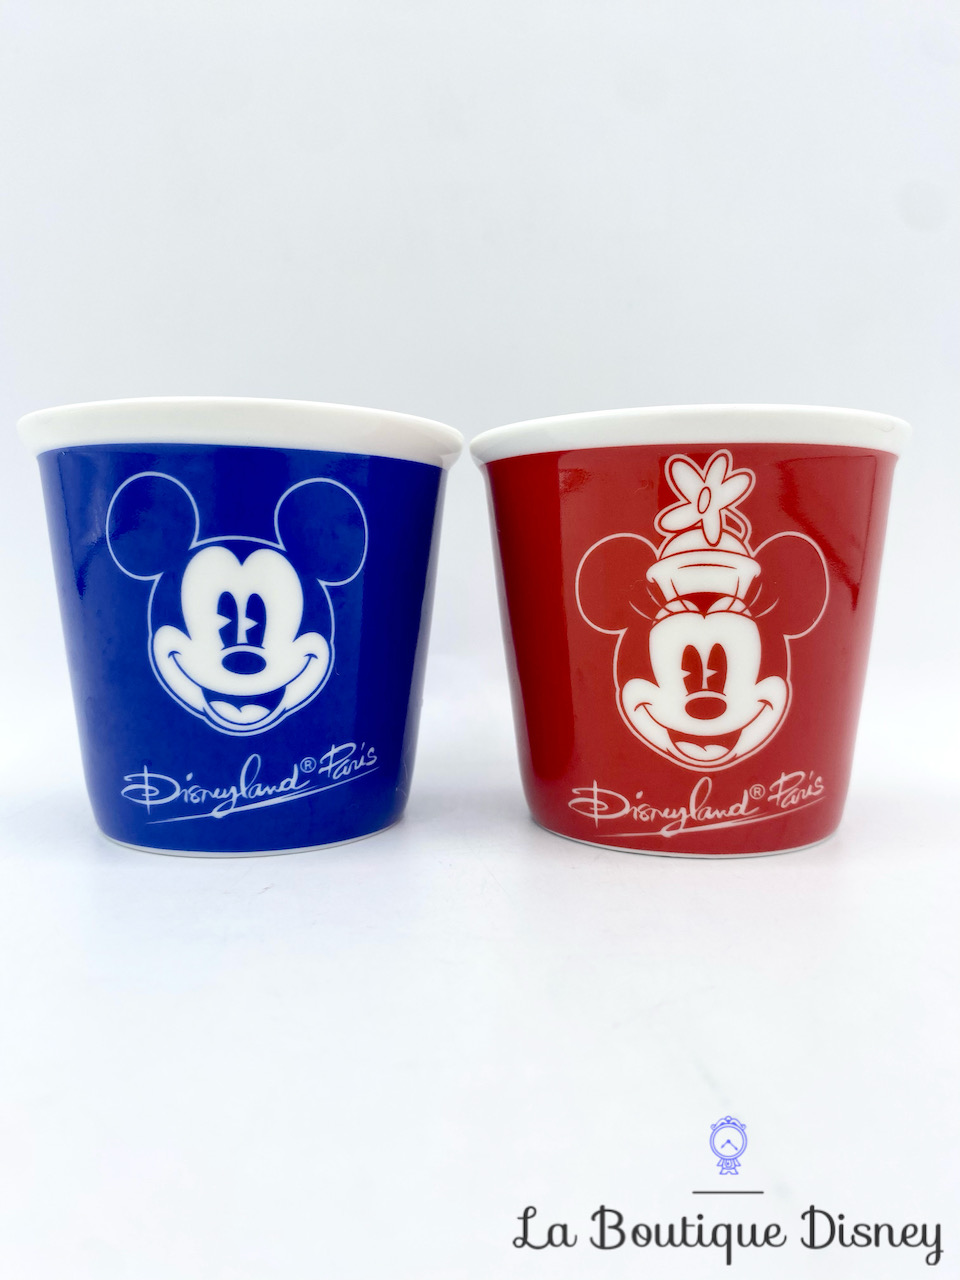 Duo Mini Tasses Mickey Minnie rouge bleu Disneyland Paris mug Disney set expresso All Started with a Mouse